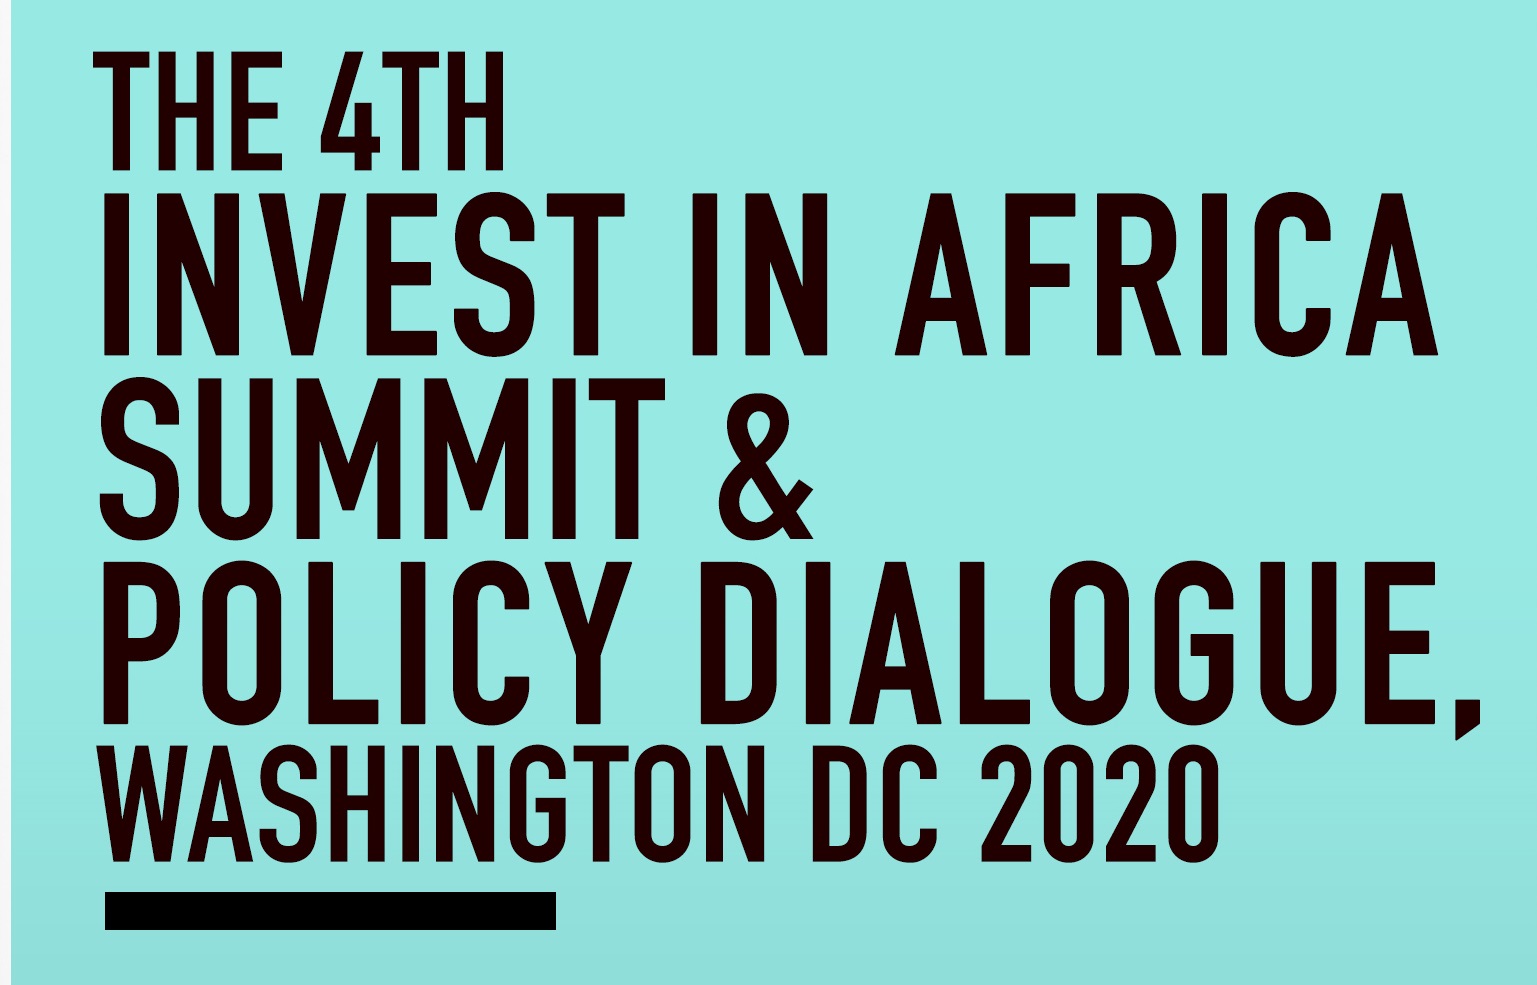 The 4th Invest in Africa Summit & Policy Dialogue, Washington DC 2020